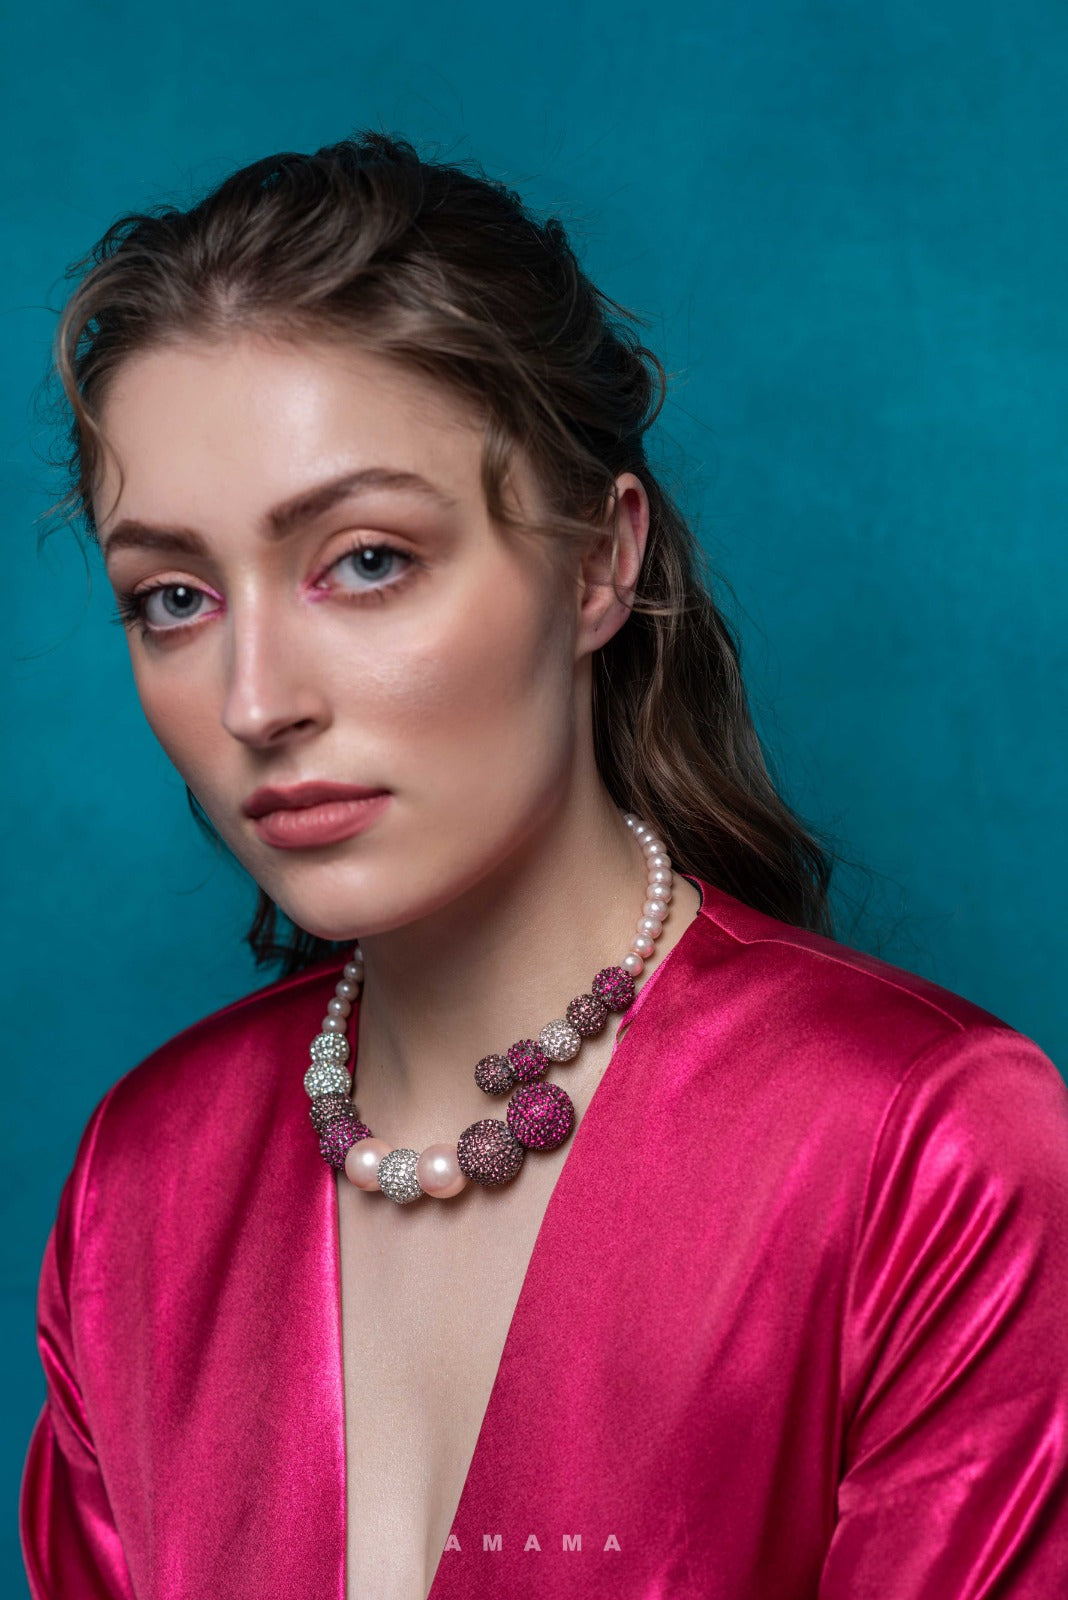 Amama,Aurora Necklace In Pink Ombre